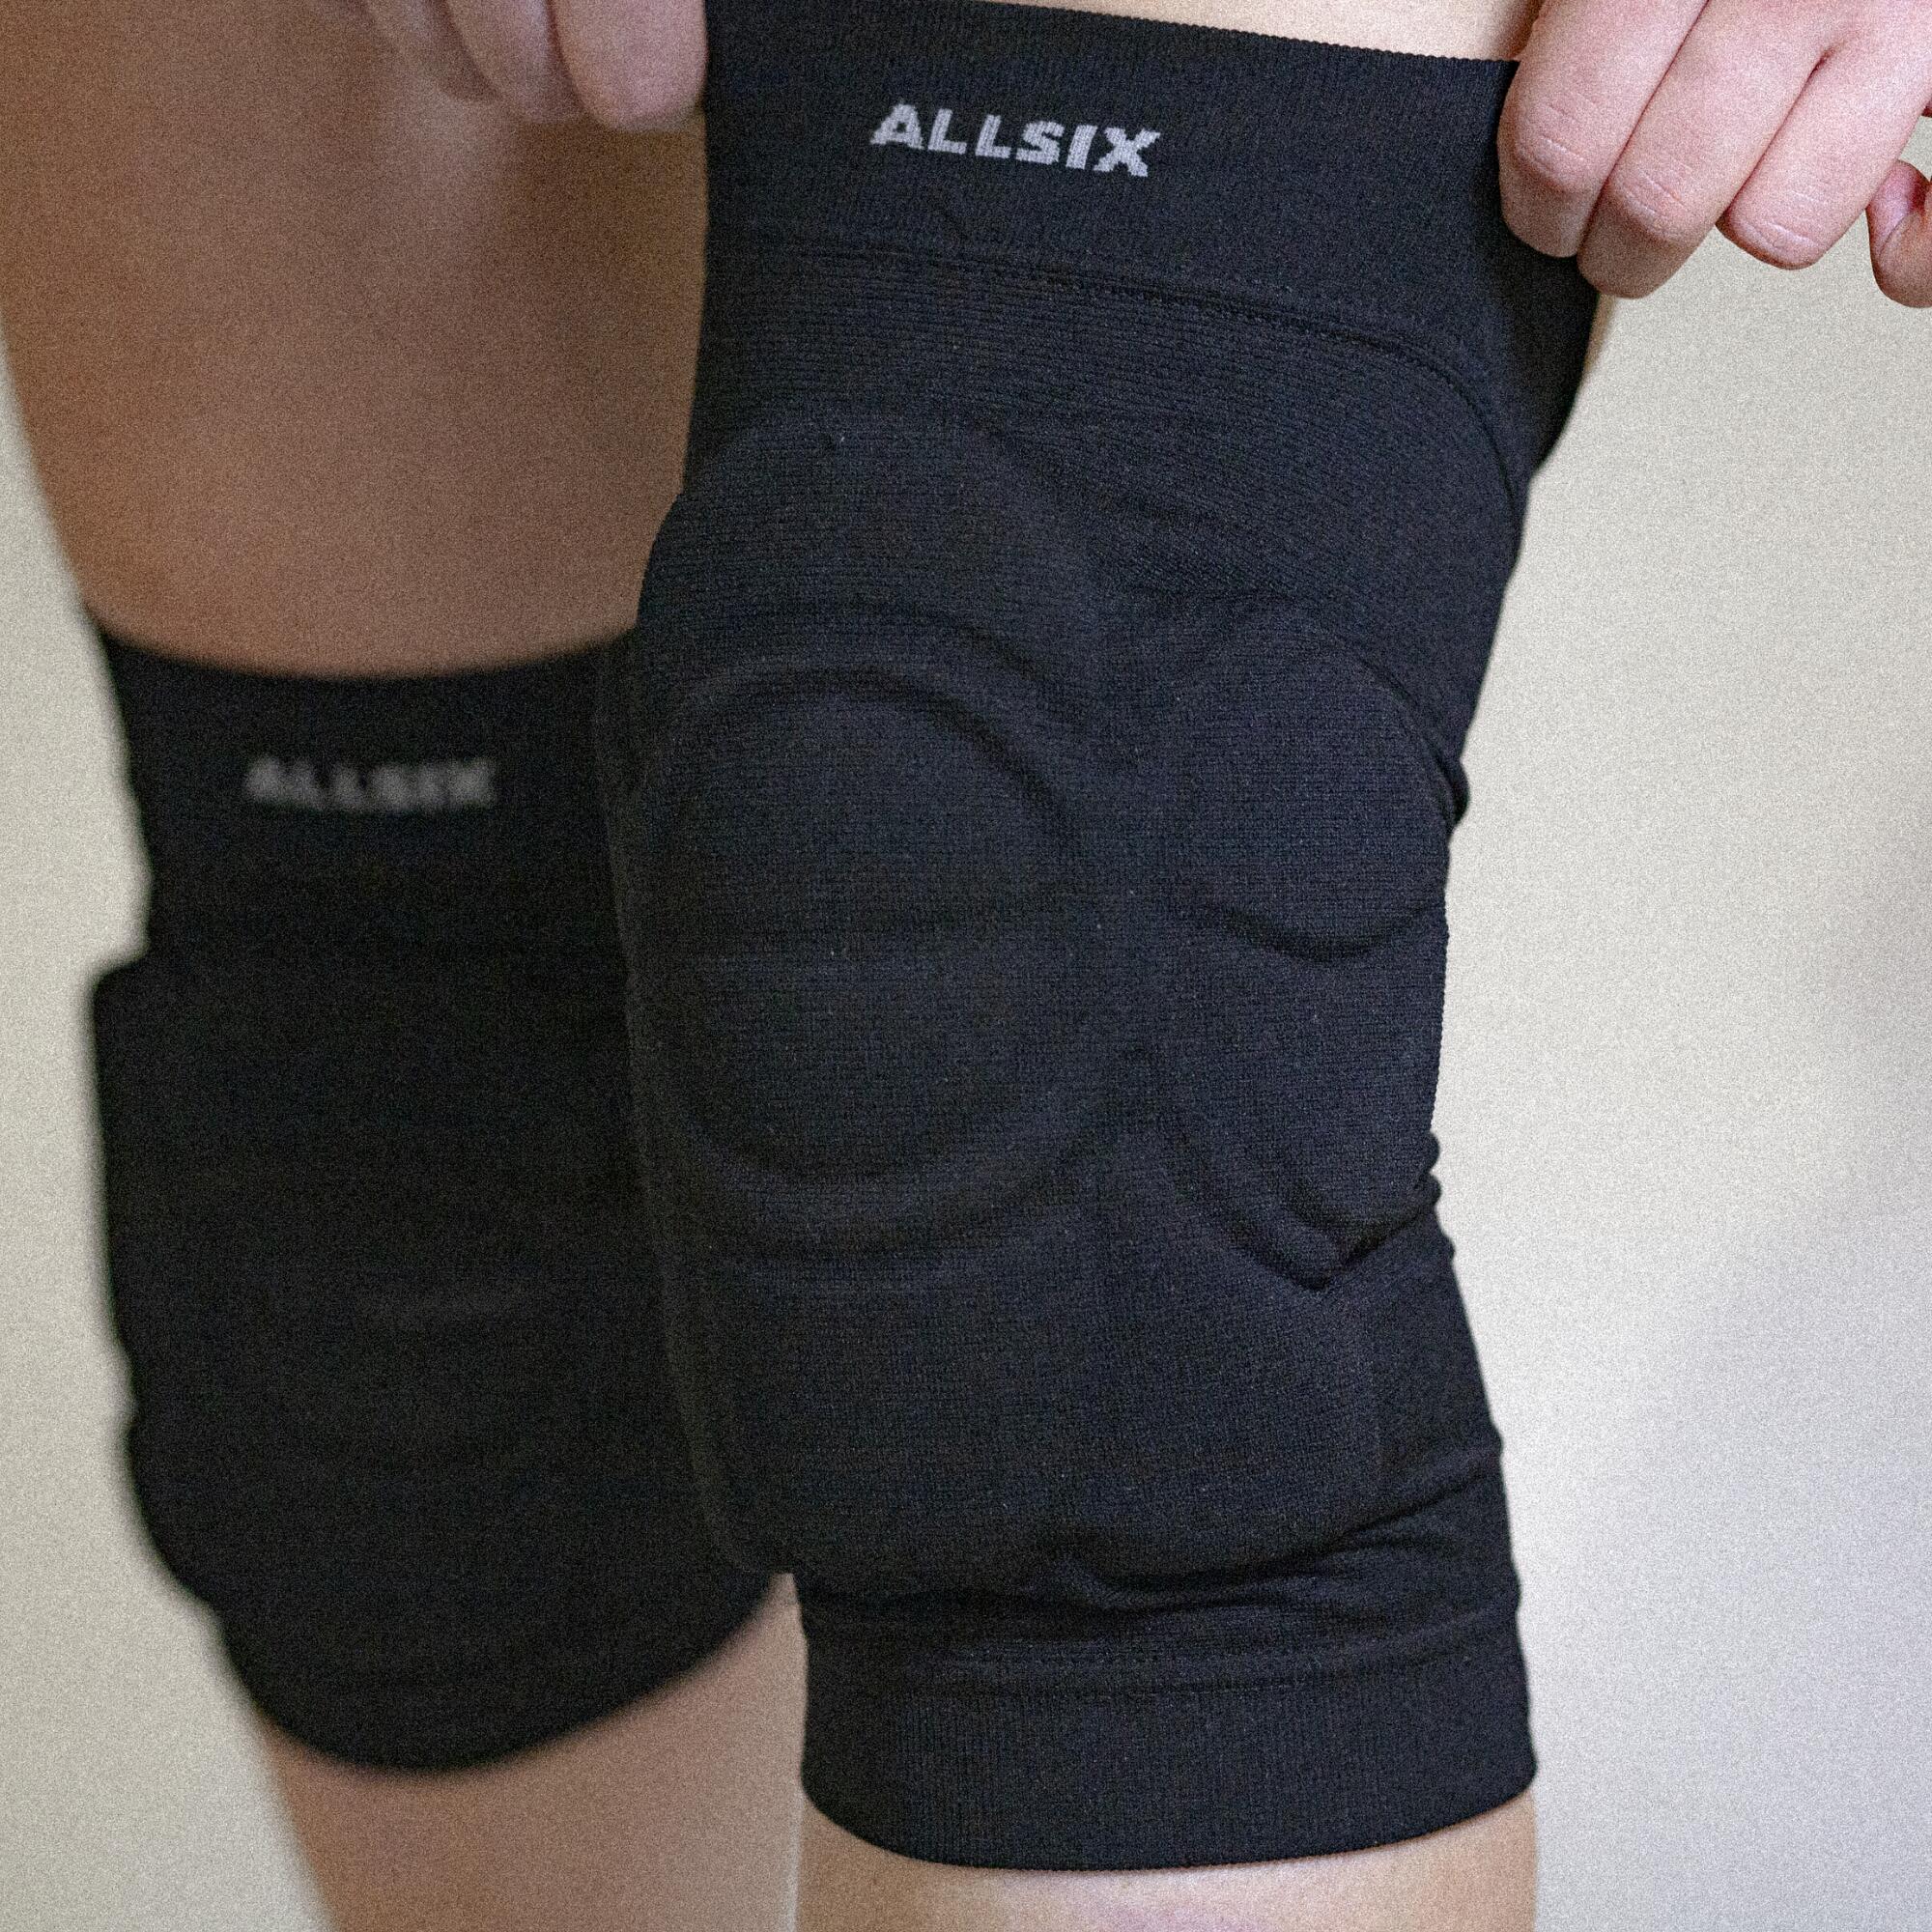 Volleyball Knee Pads for Intensive Play. 6/6